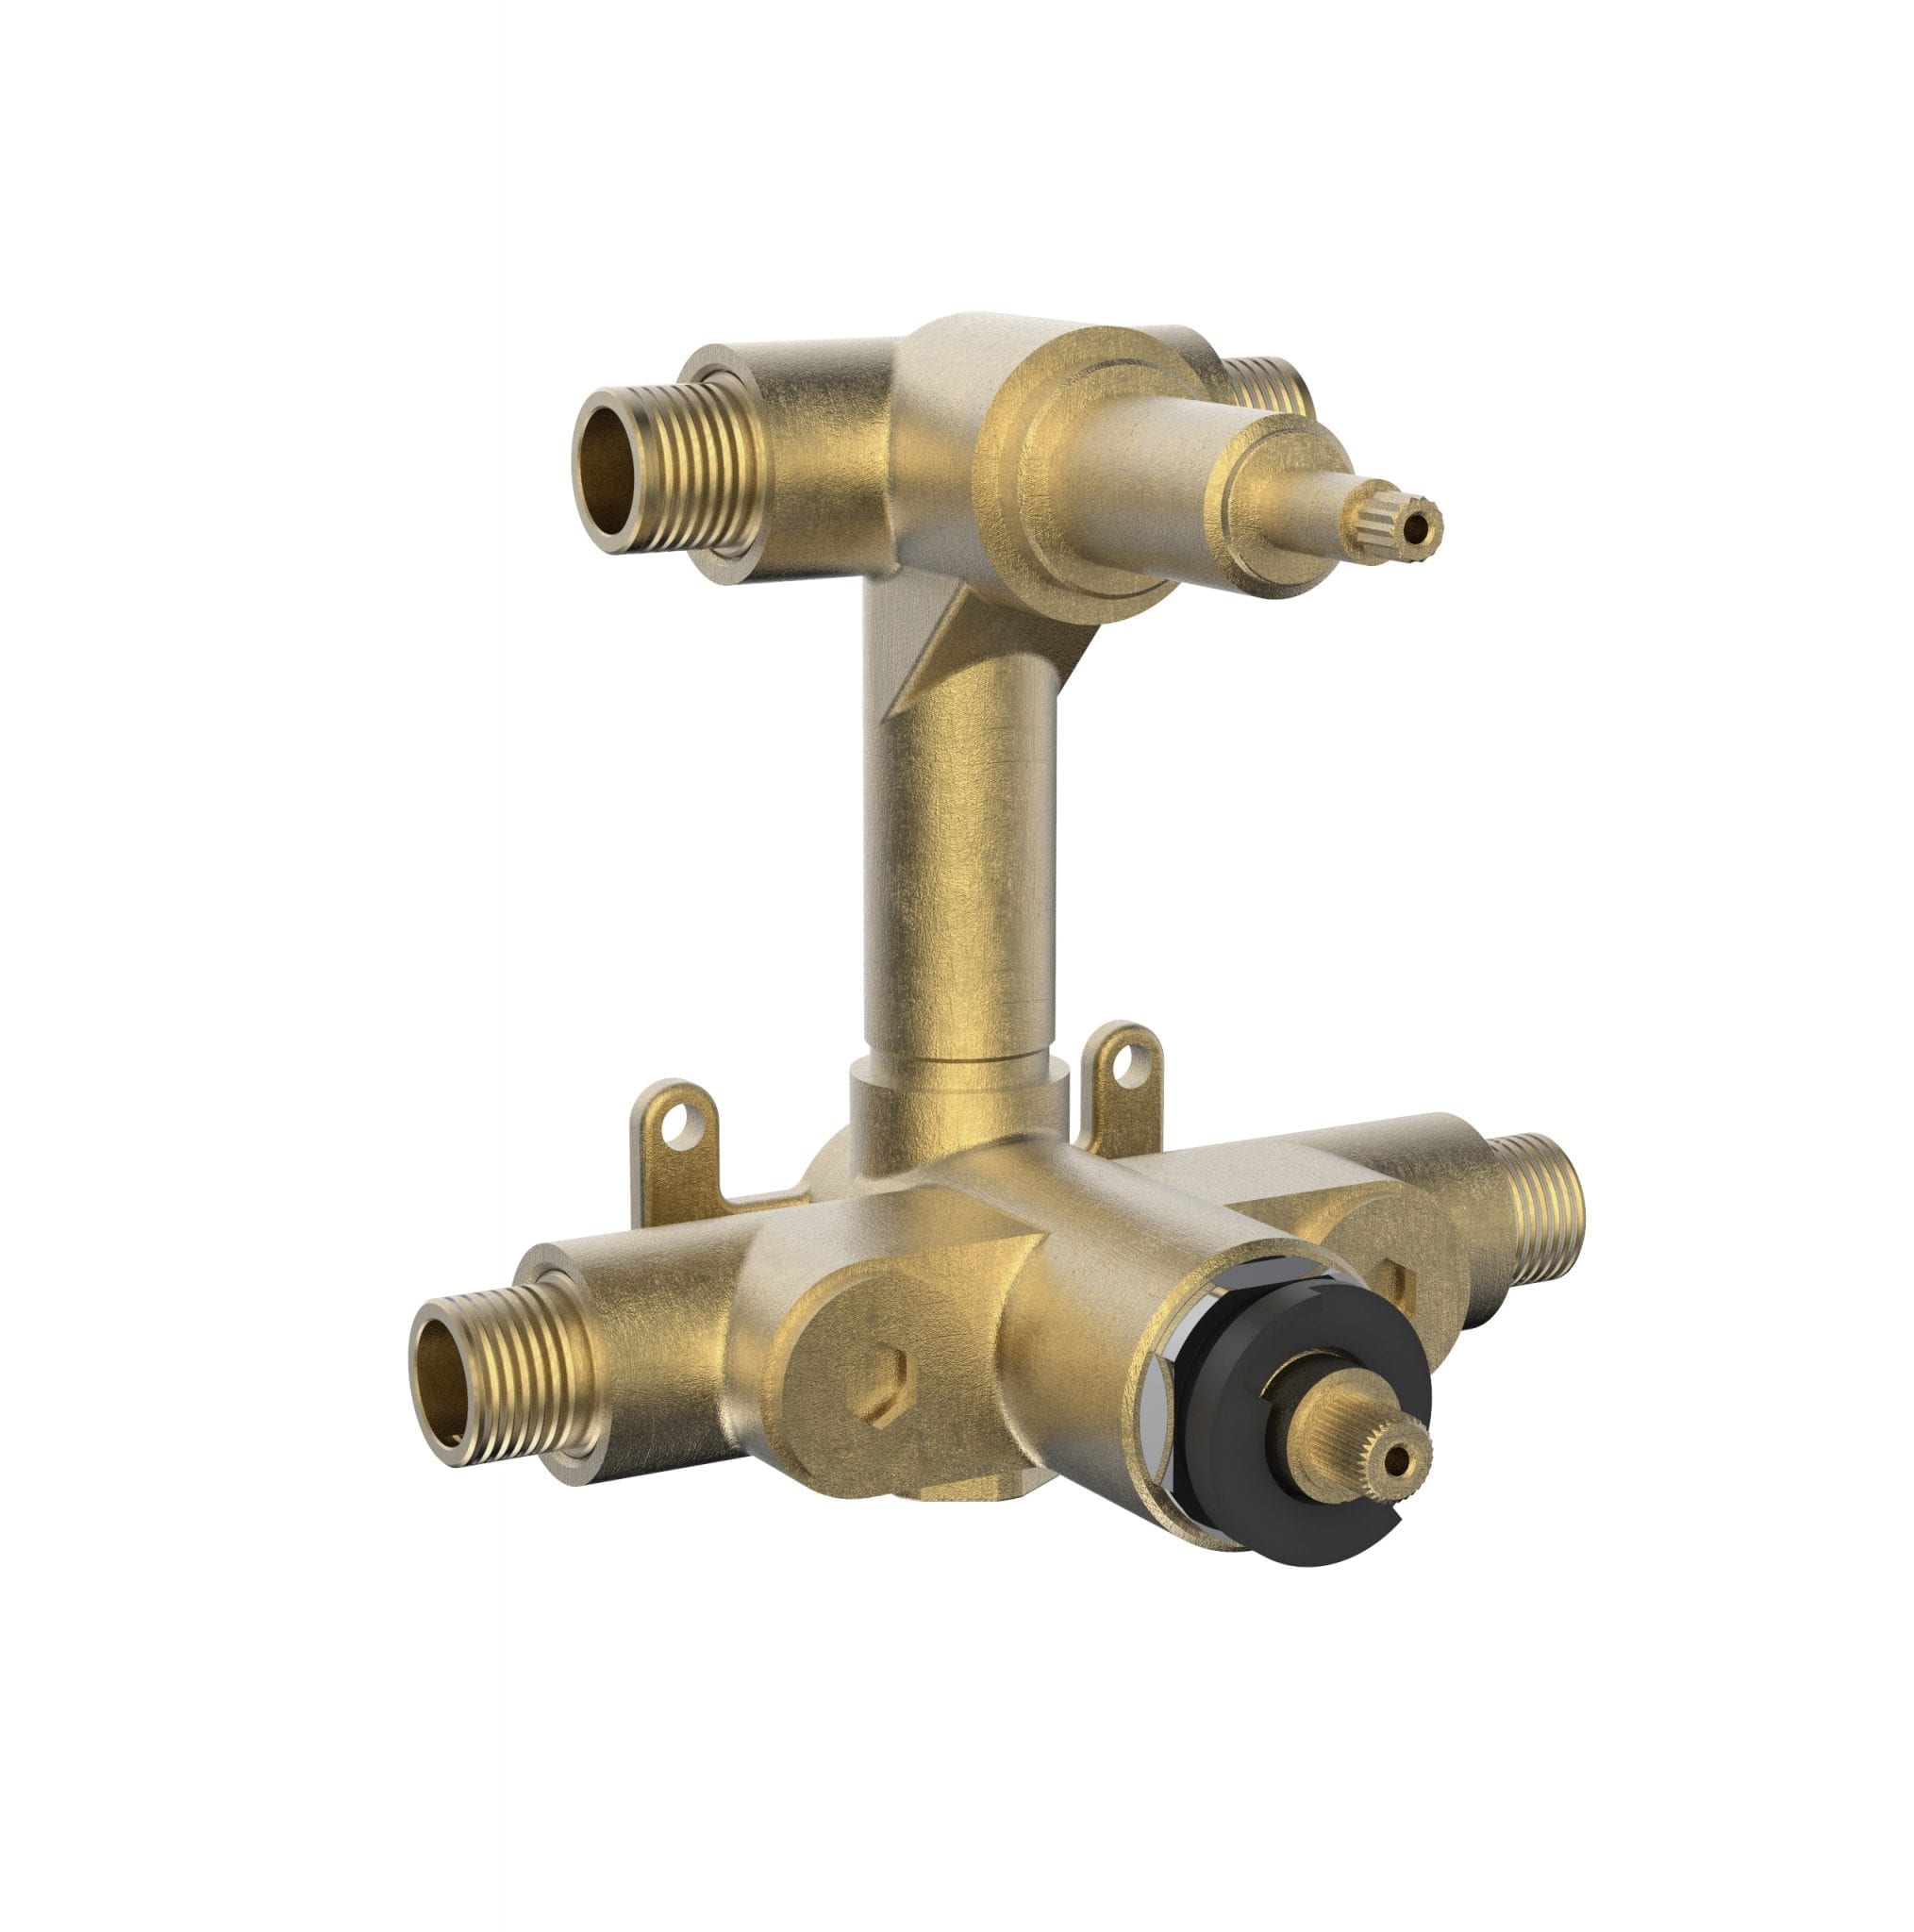 Bélanger 98TSR2- 2-Way Diverter Thermo Valve Rough-In For Copper Connection W/Check Stops